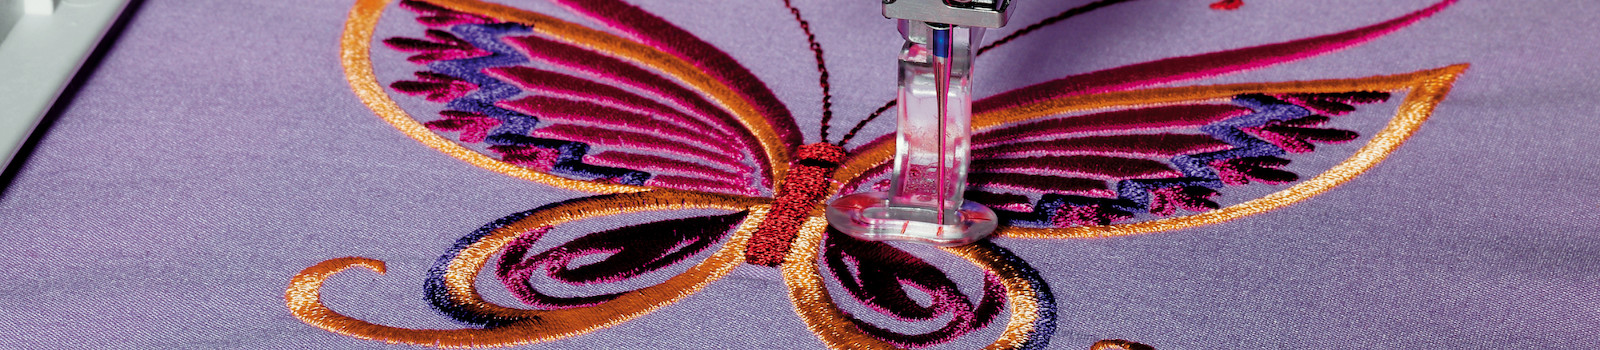 Machine Embroidery Software